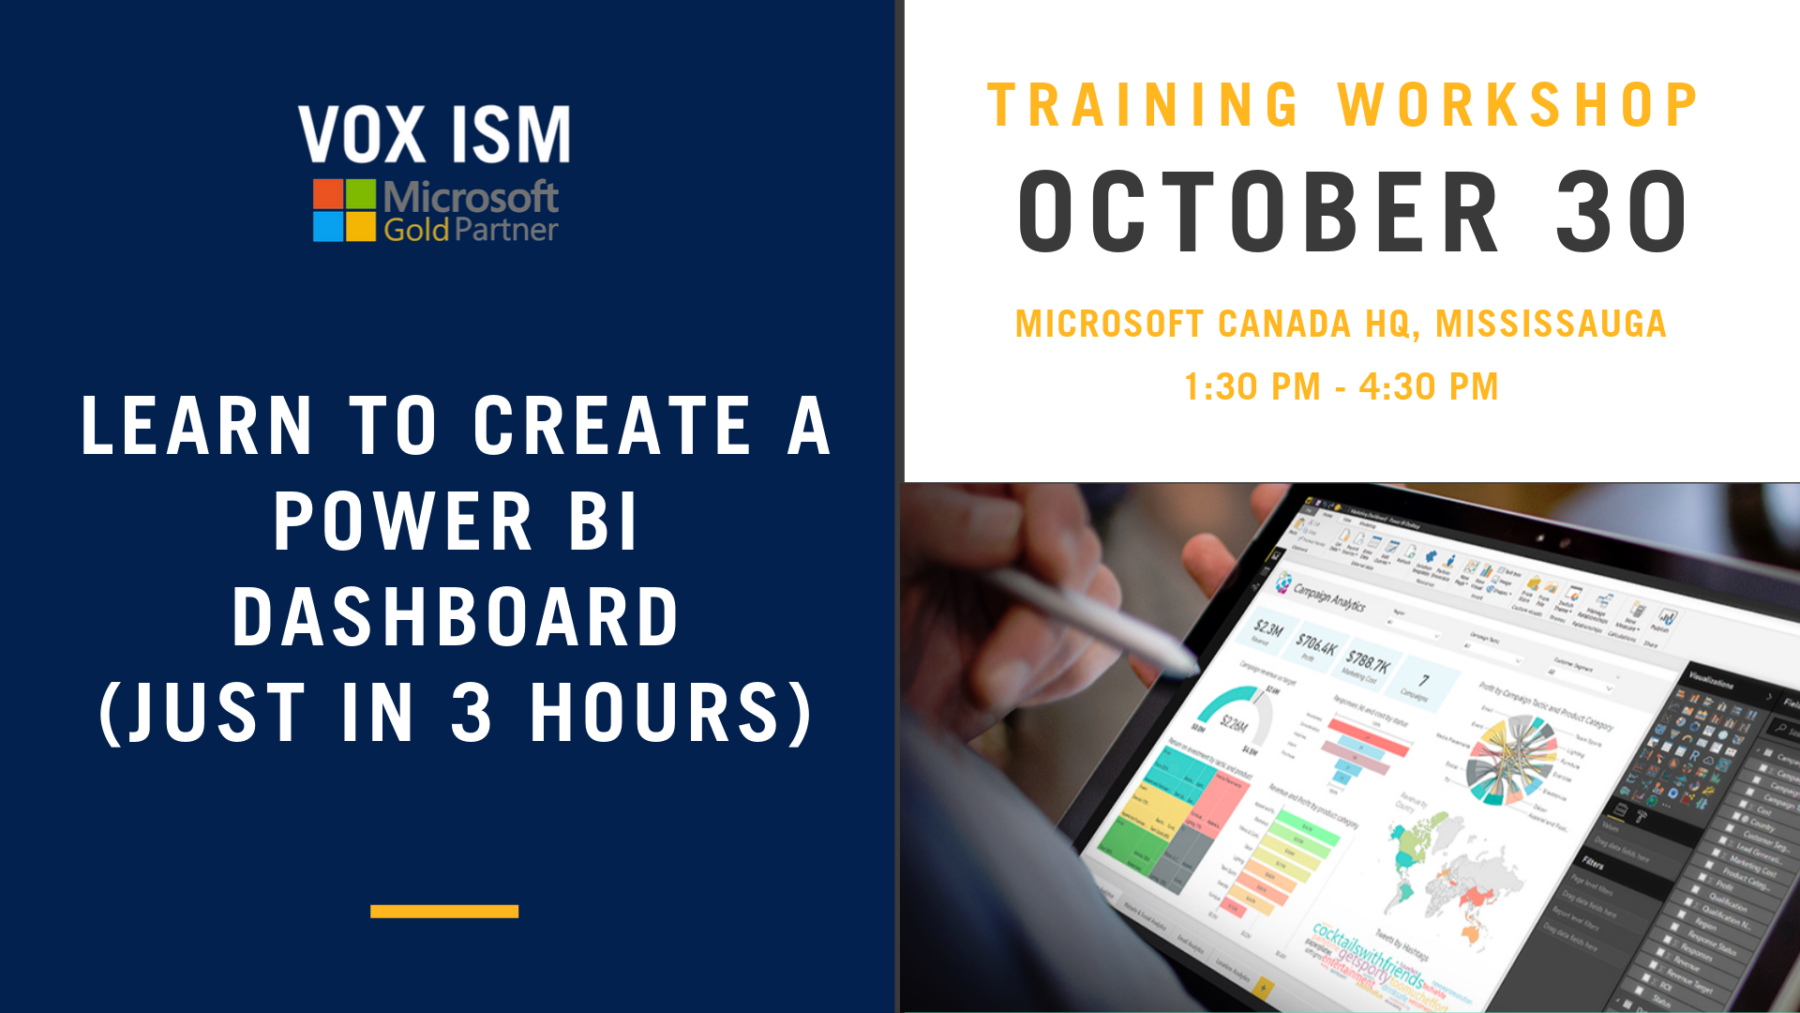 Learn to create Power BI Dashboard (just in 3 hours) – October 30